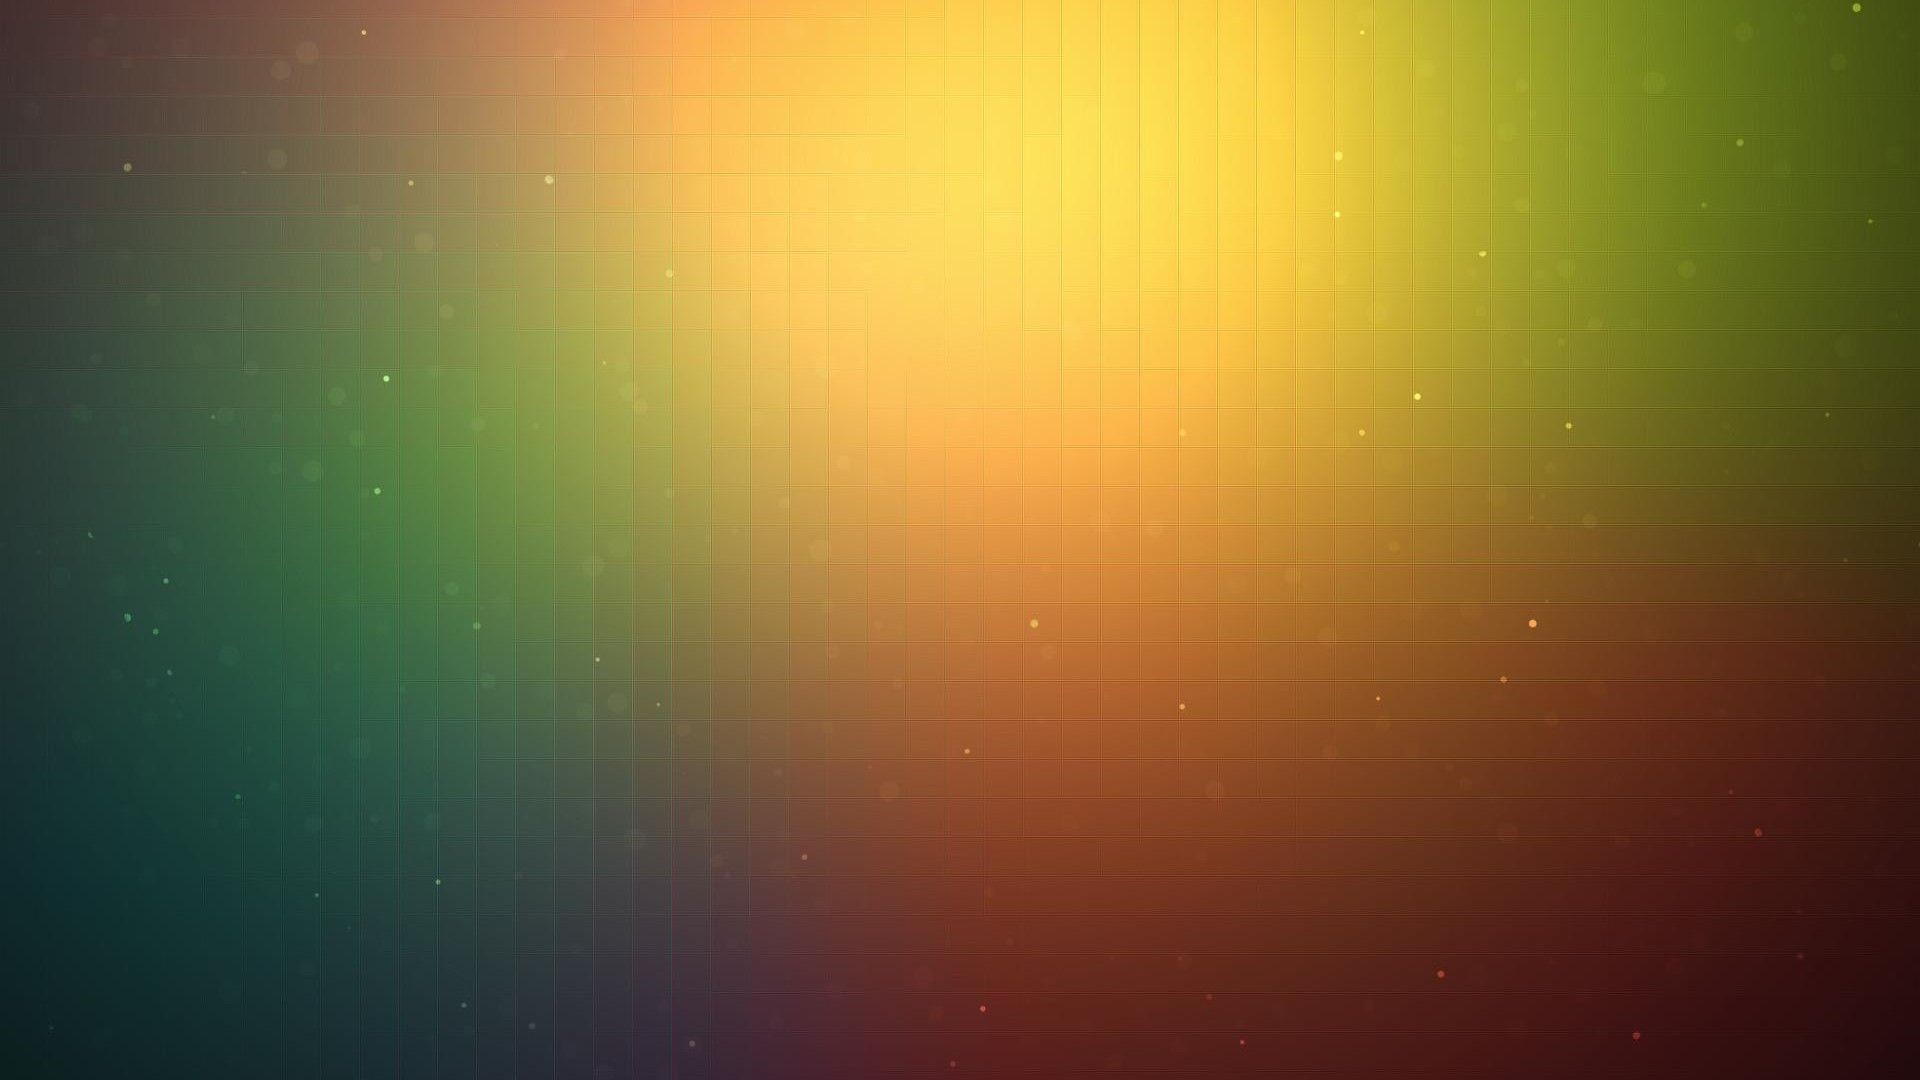 1920x1080 cool simple background designs. cool simple background designs u